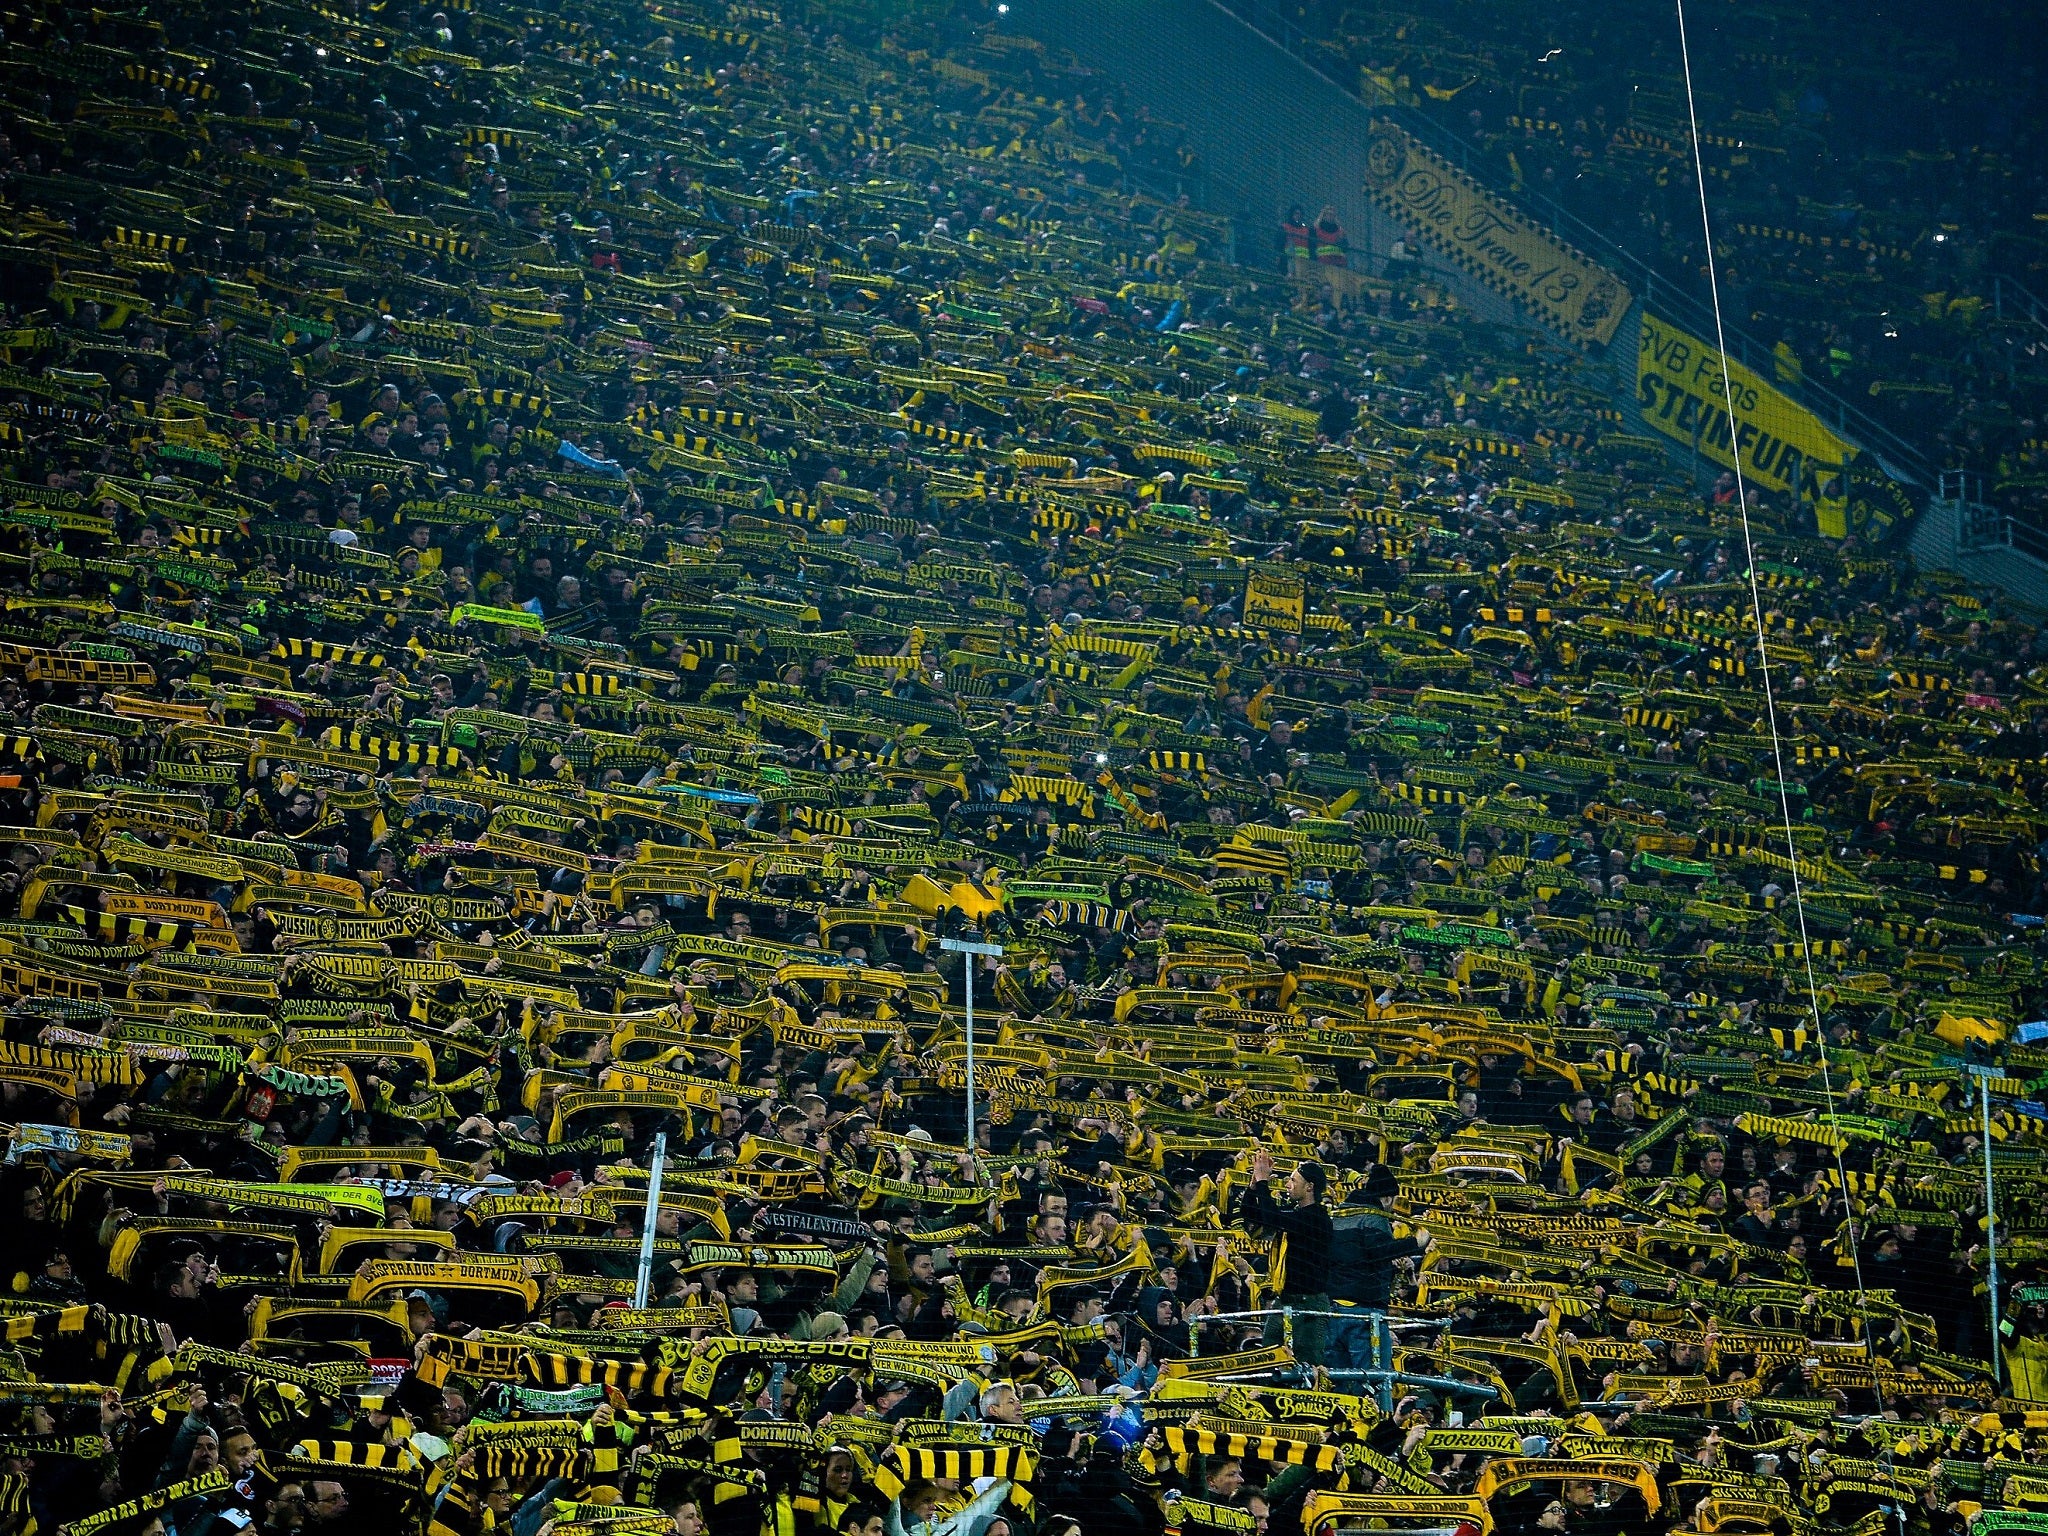 Dortmund supporters and players sing You'll Never Walk Alone